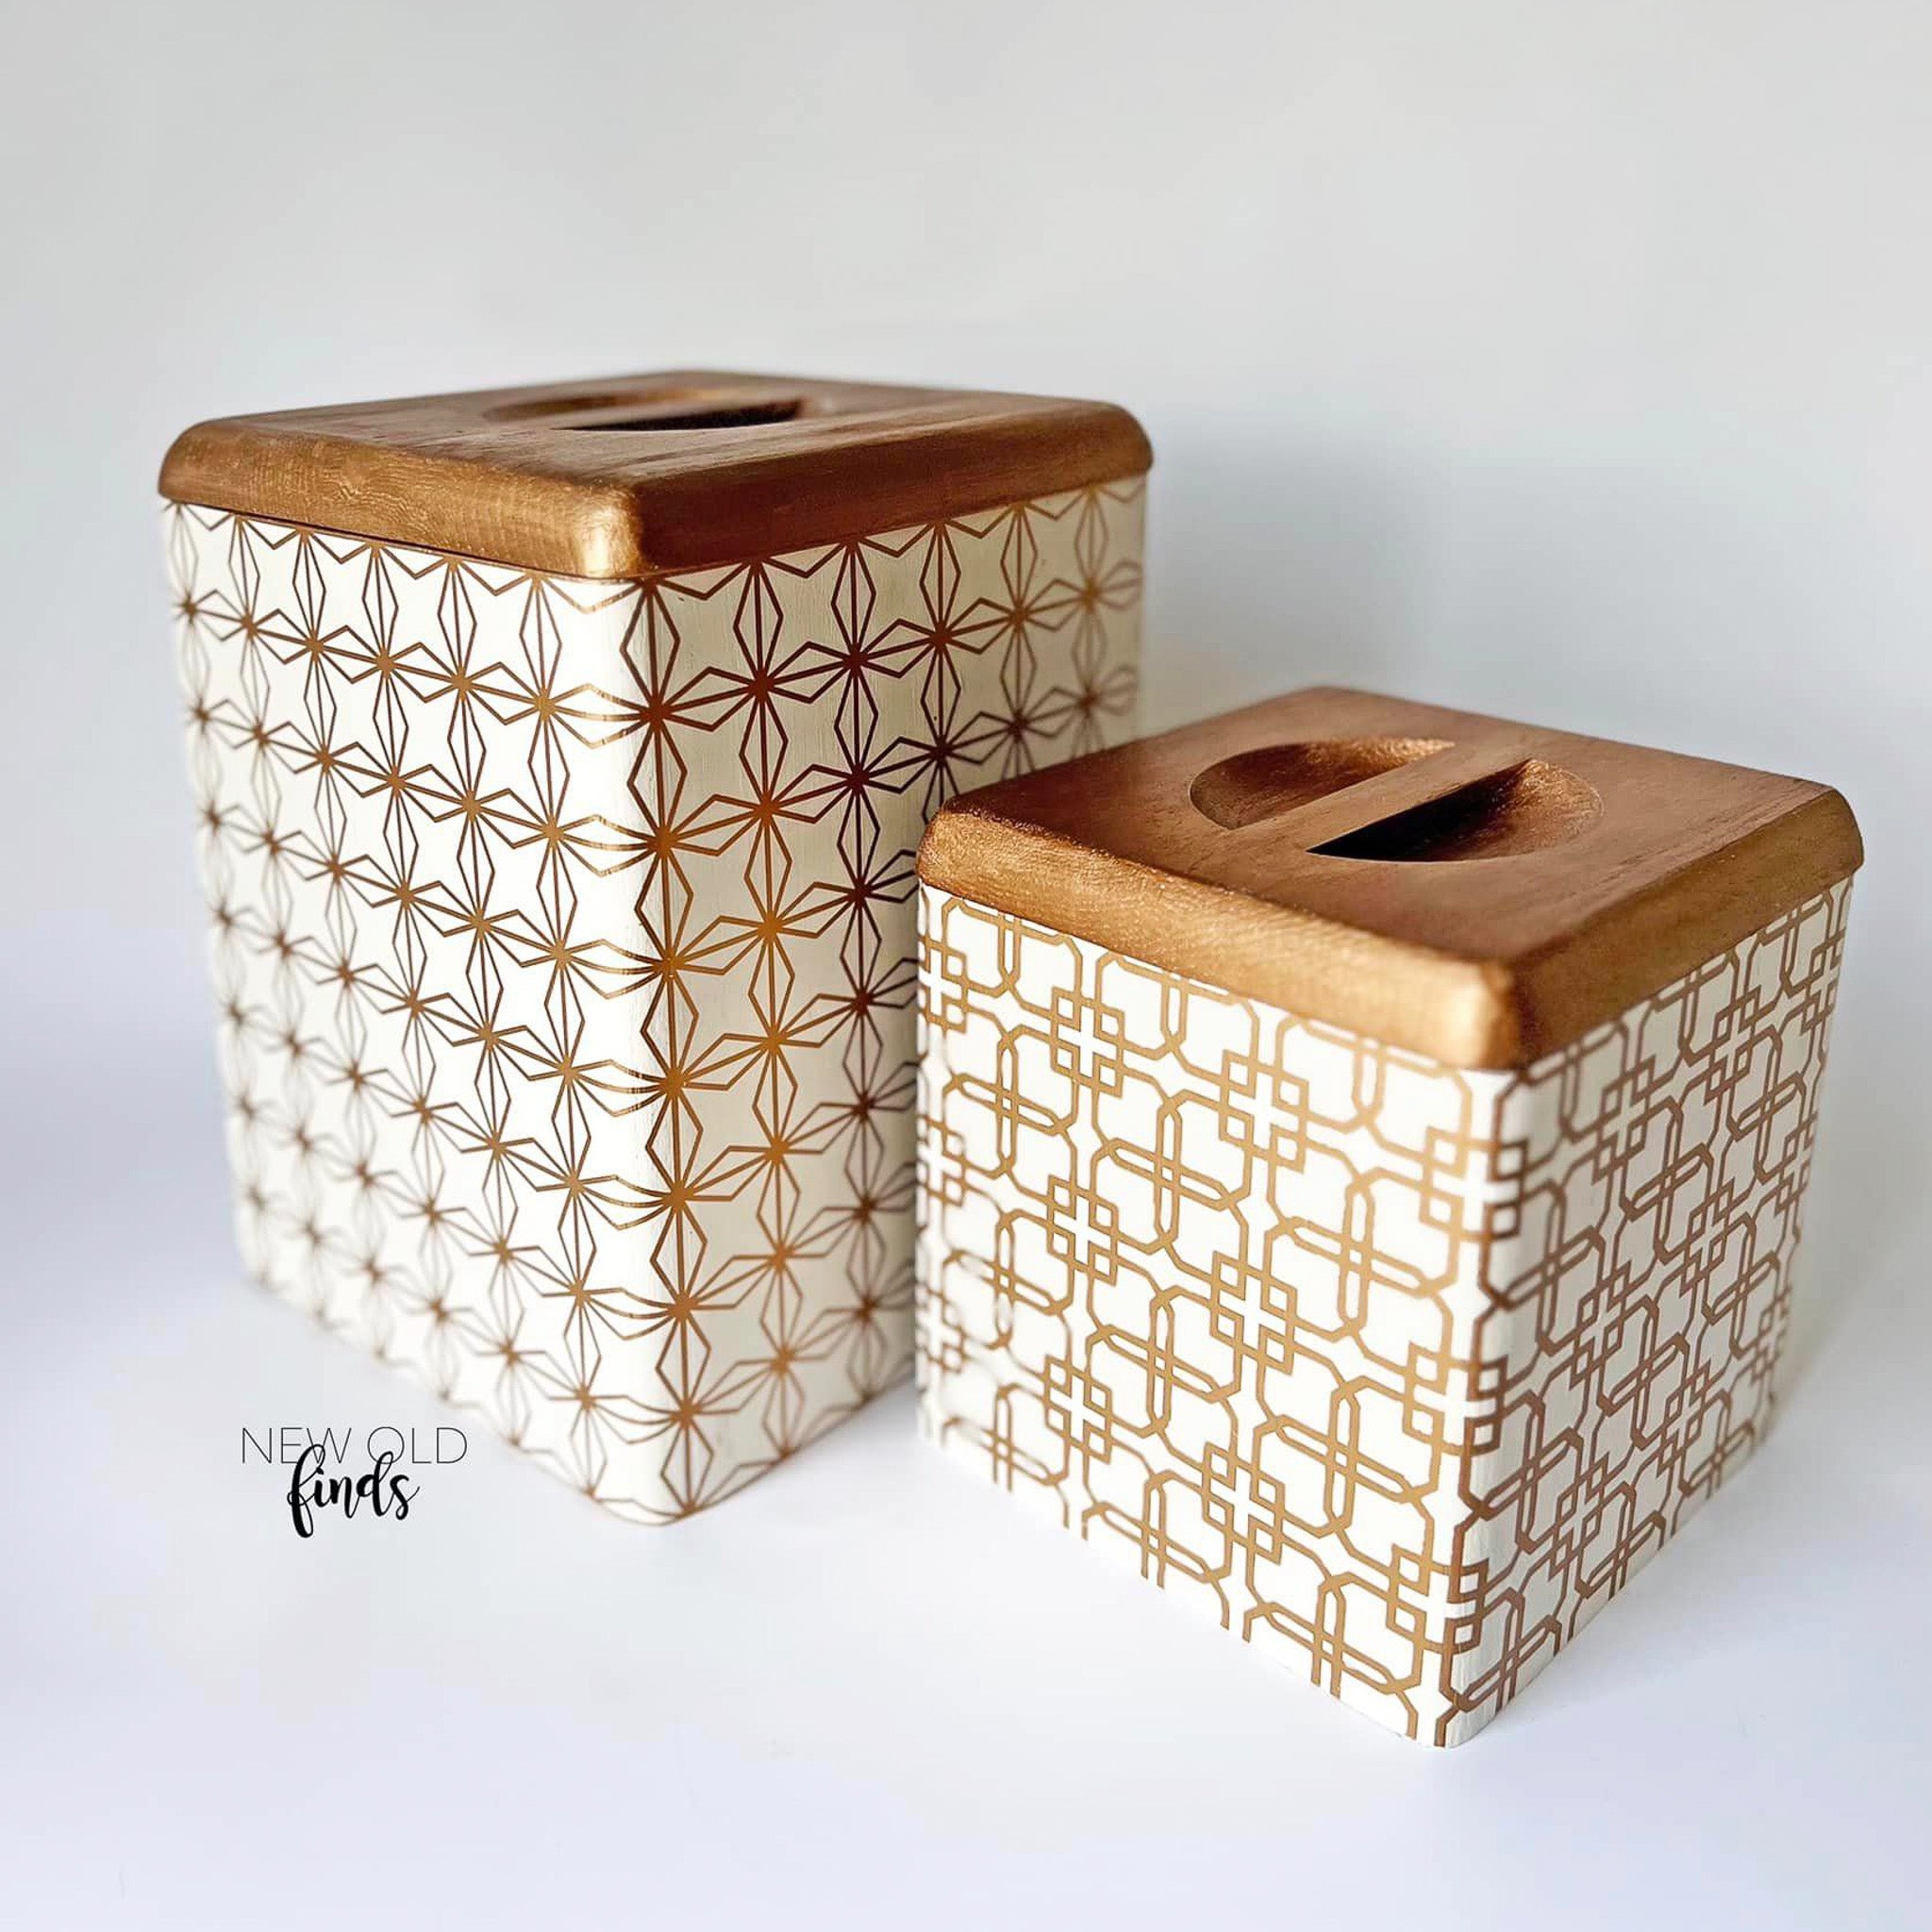 Two counter-top dry storage containers refurbished by New Old Finds are painted white with natural wood lids and features ReDesign with Prima's Motif Geometrique small transfer on them.